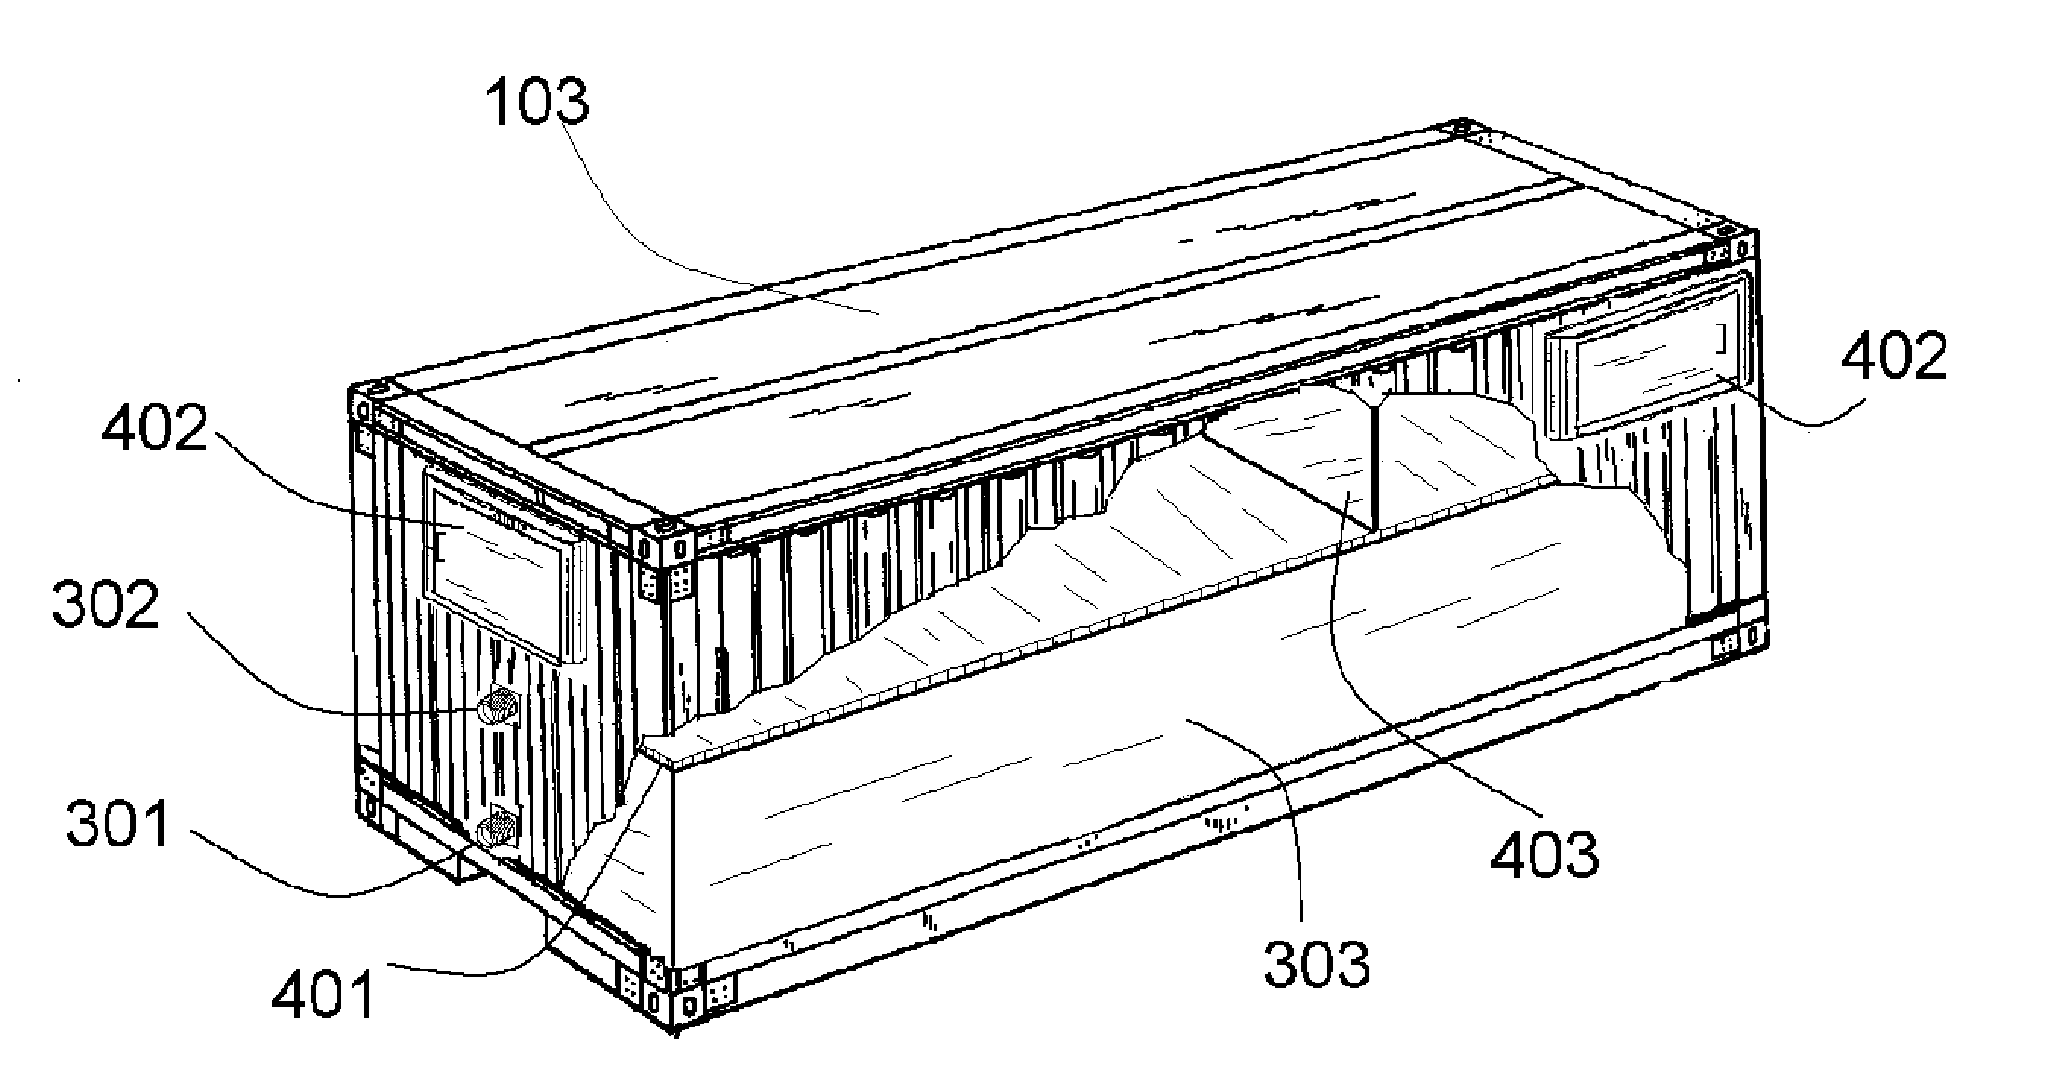 Method for Converting an Intermodal Shipping Container to a Rapidly Deployable Emergency Food, Water and Medicines Supply Container and Resulting Product thereof